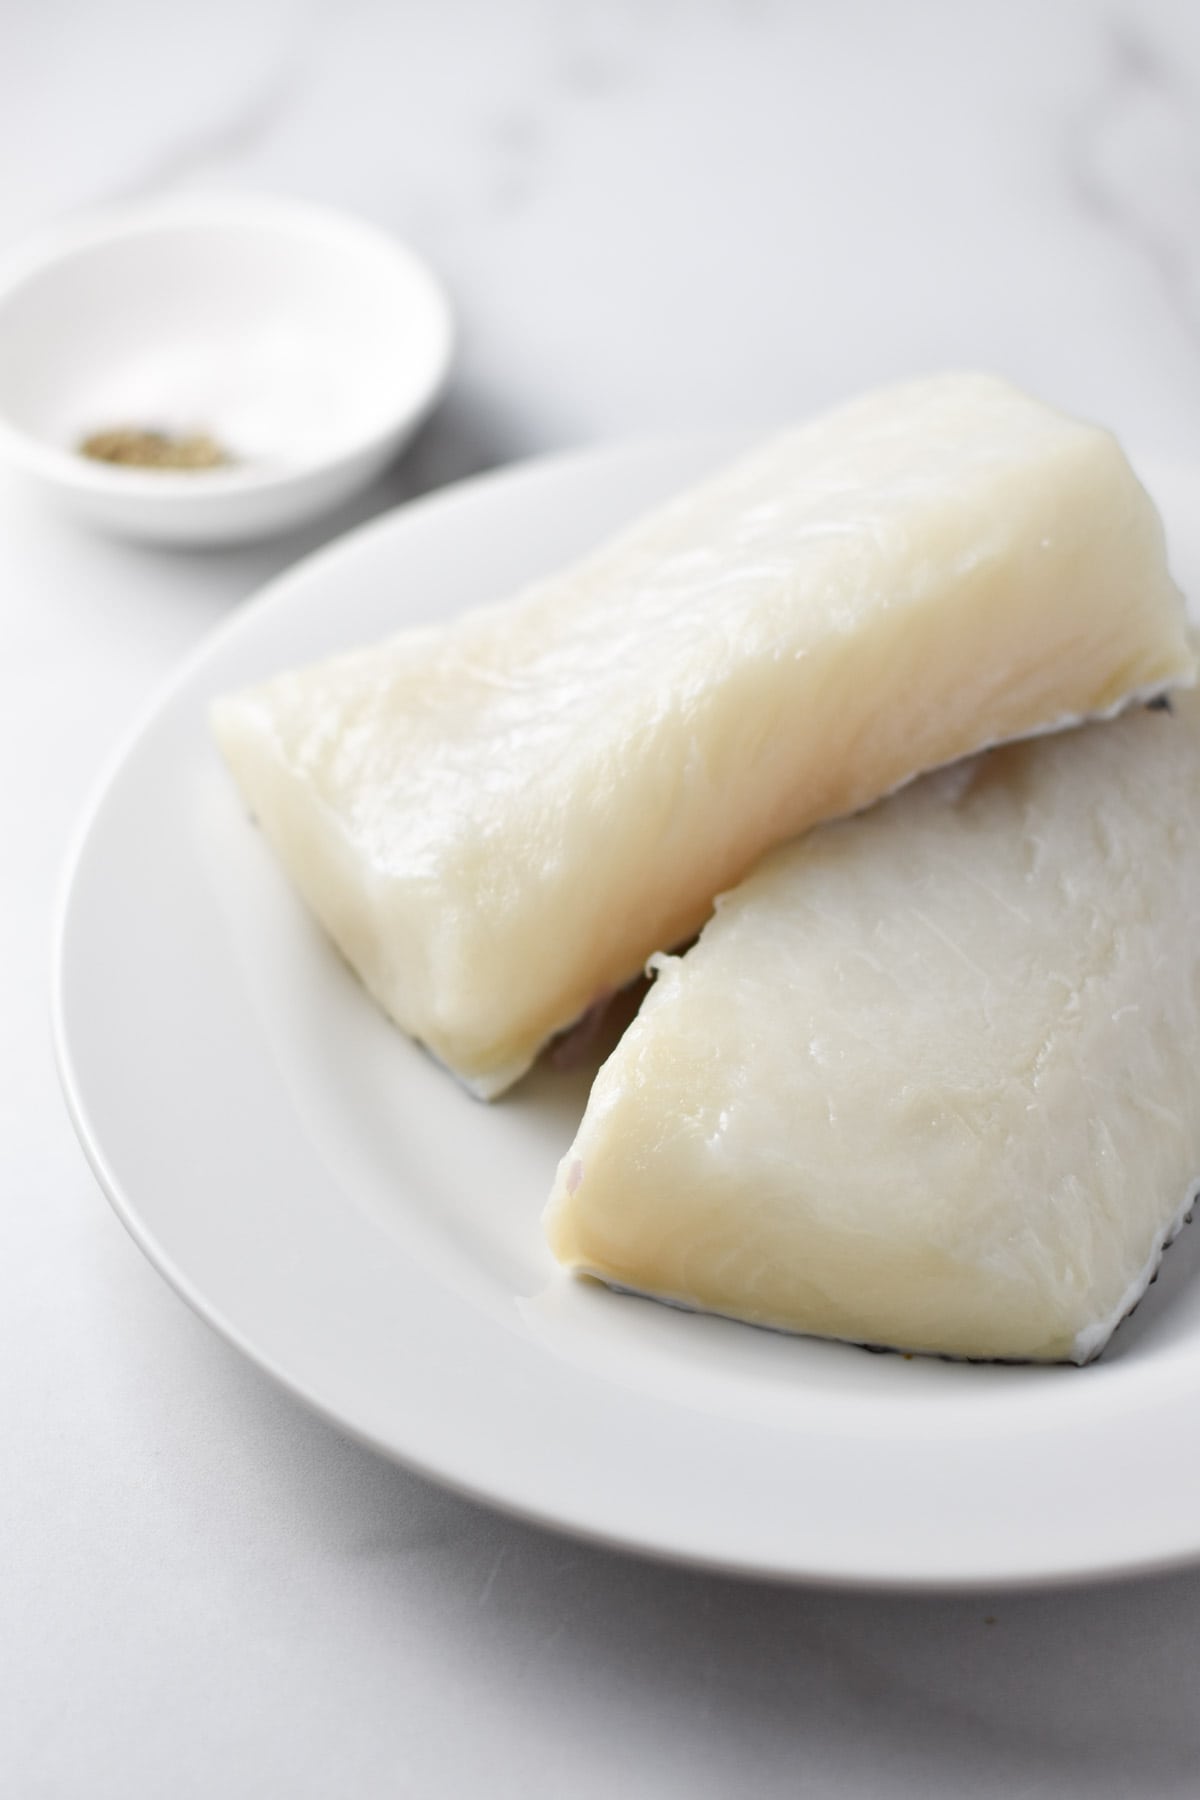 Uncooked Chilean sea bass fillets on a white plate.